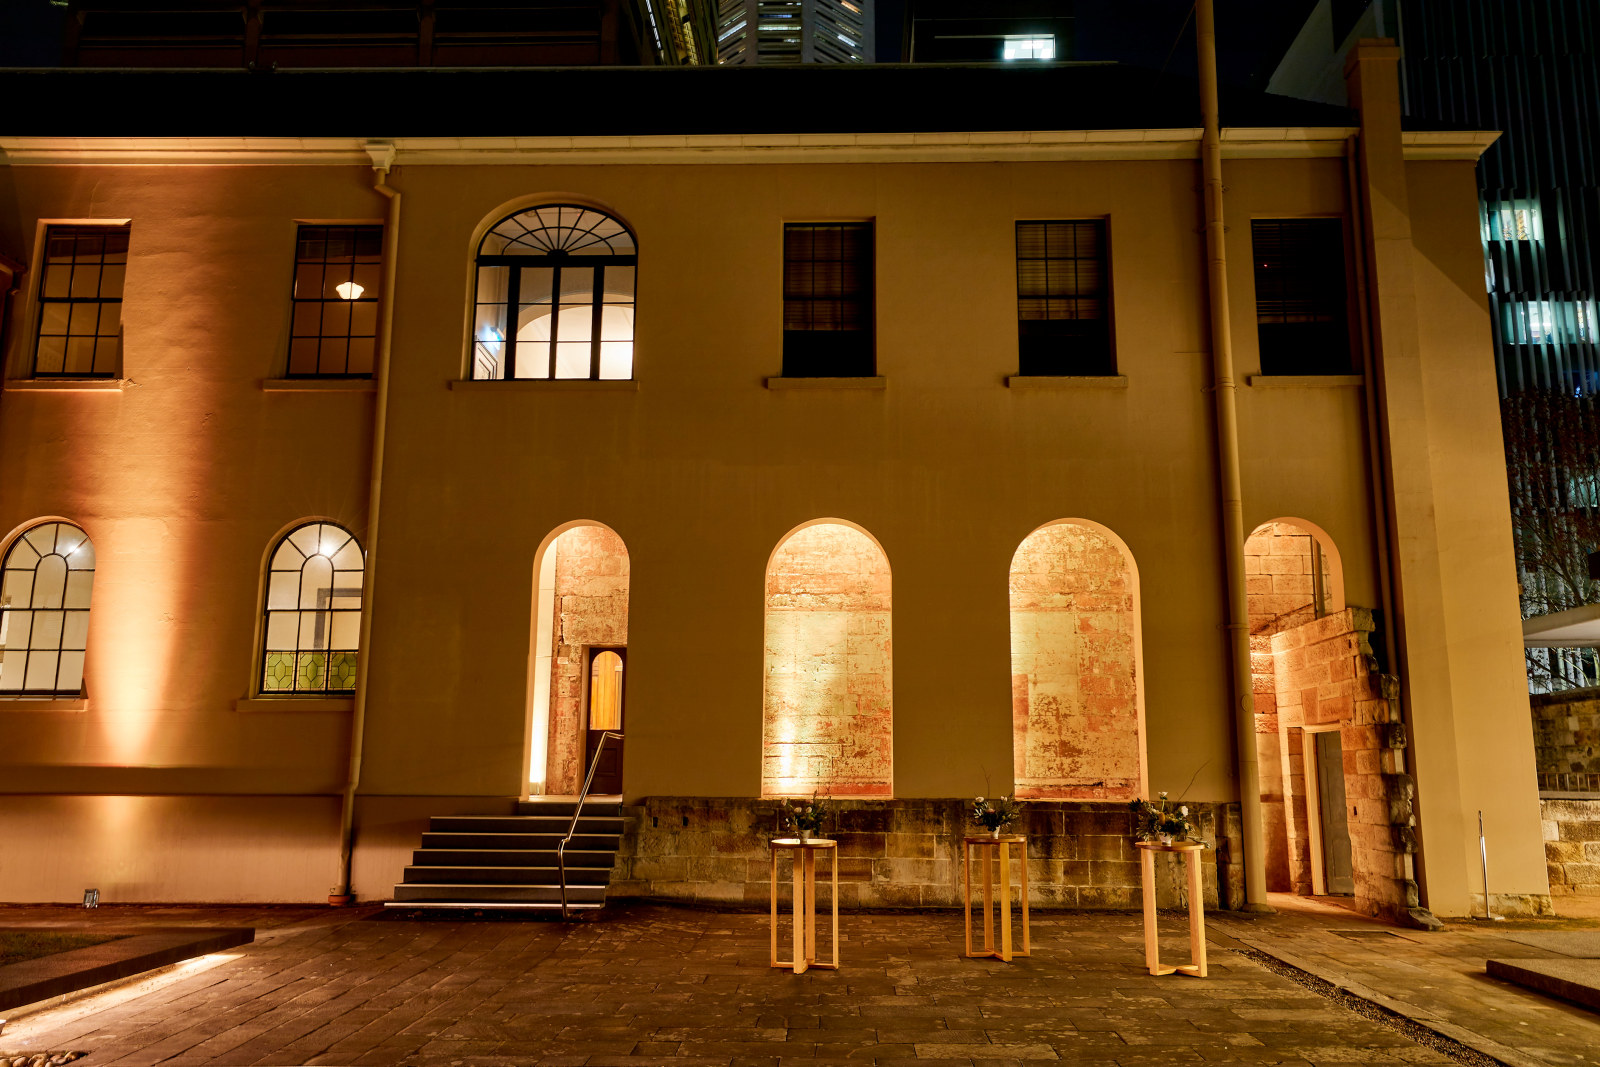 Rear of the Mint building lit up and tables in the Courtyard